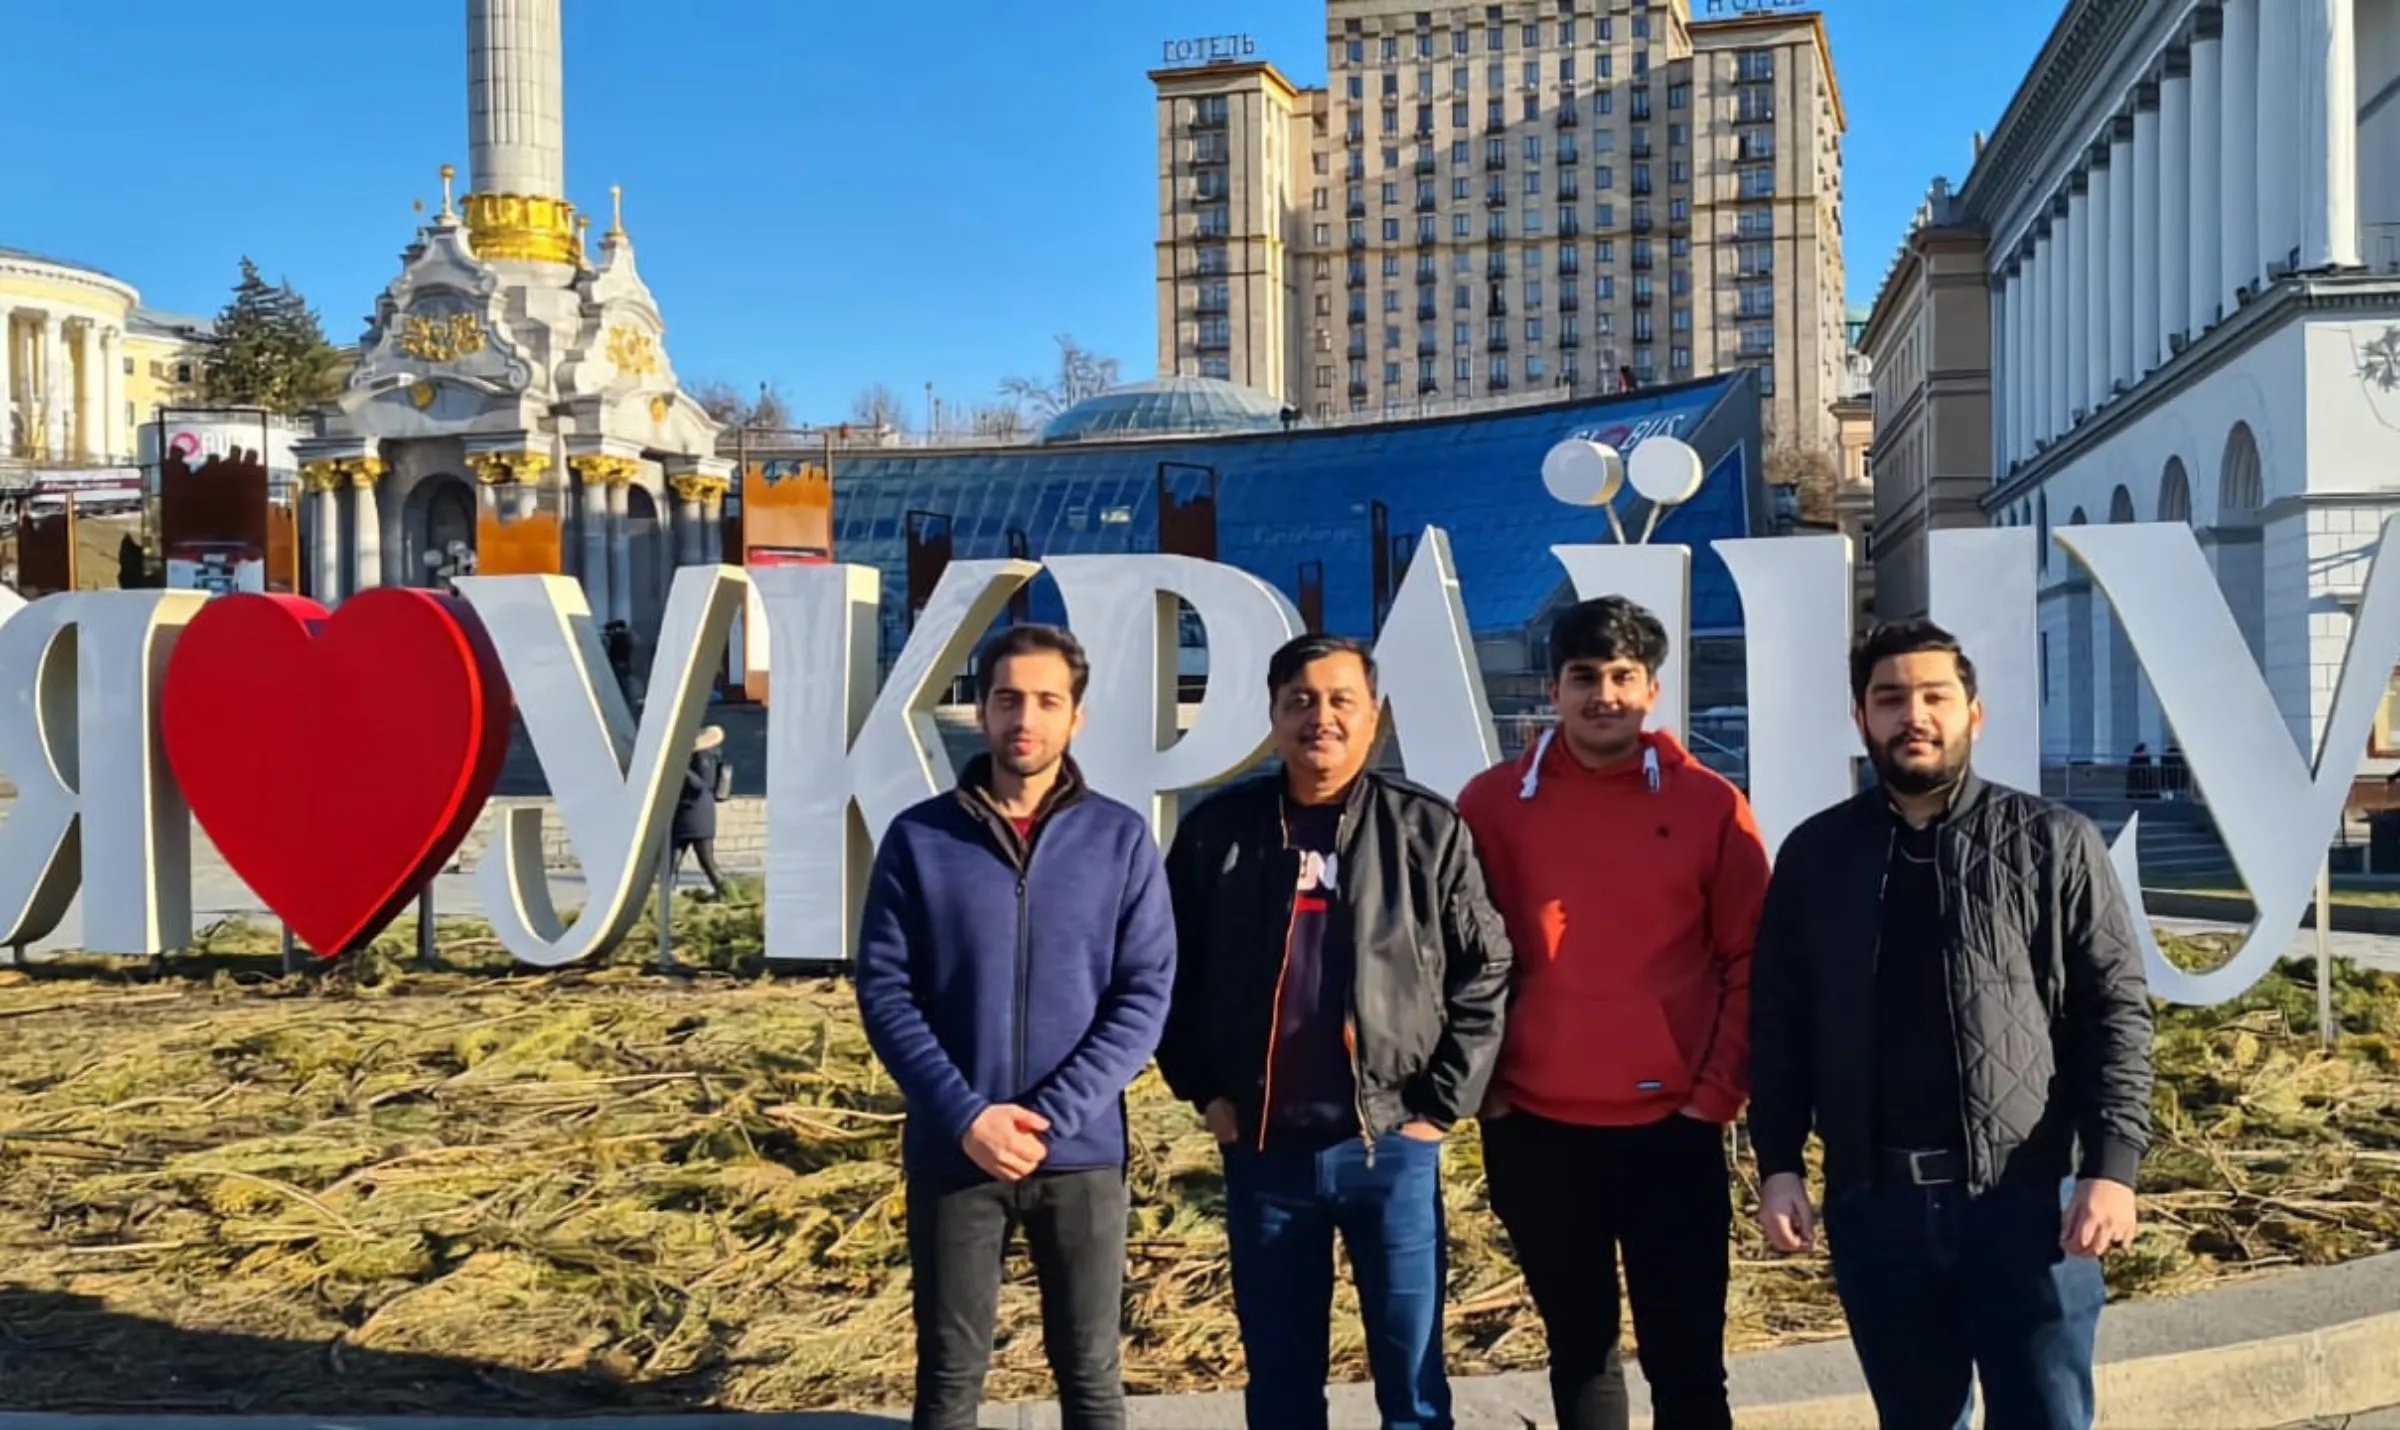 Mohammad Rayyan Hamid (L), a student at Kyiv Medical University, poses with his friends in Kyiv, Ukraine. Thomson Reuters Foundation/Handout via Basit Hamid